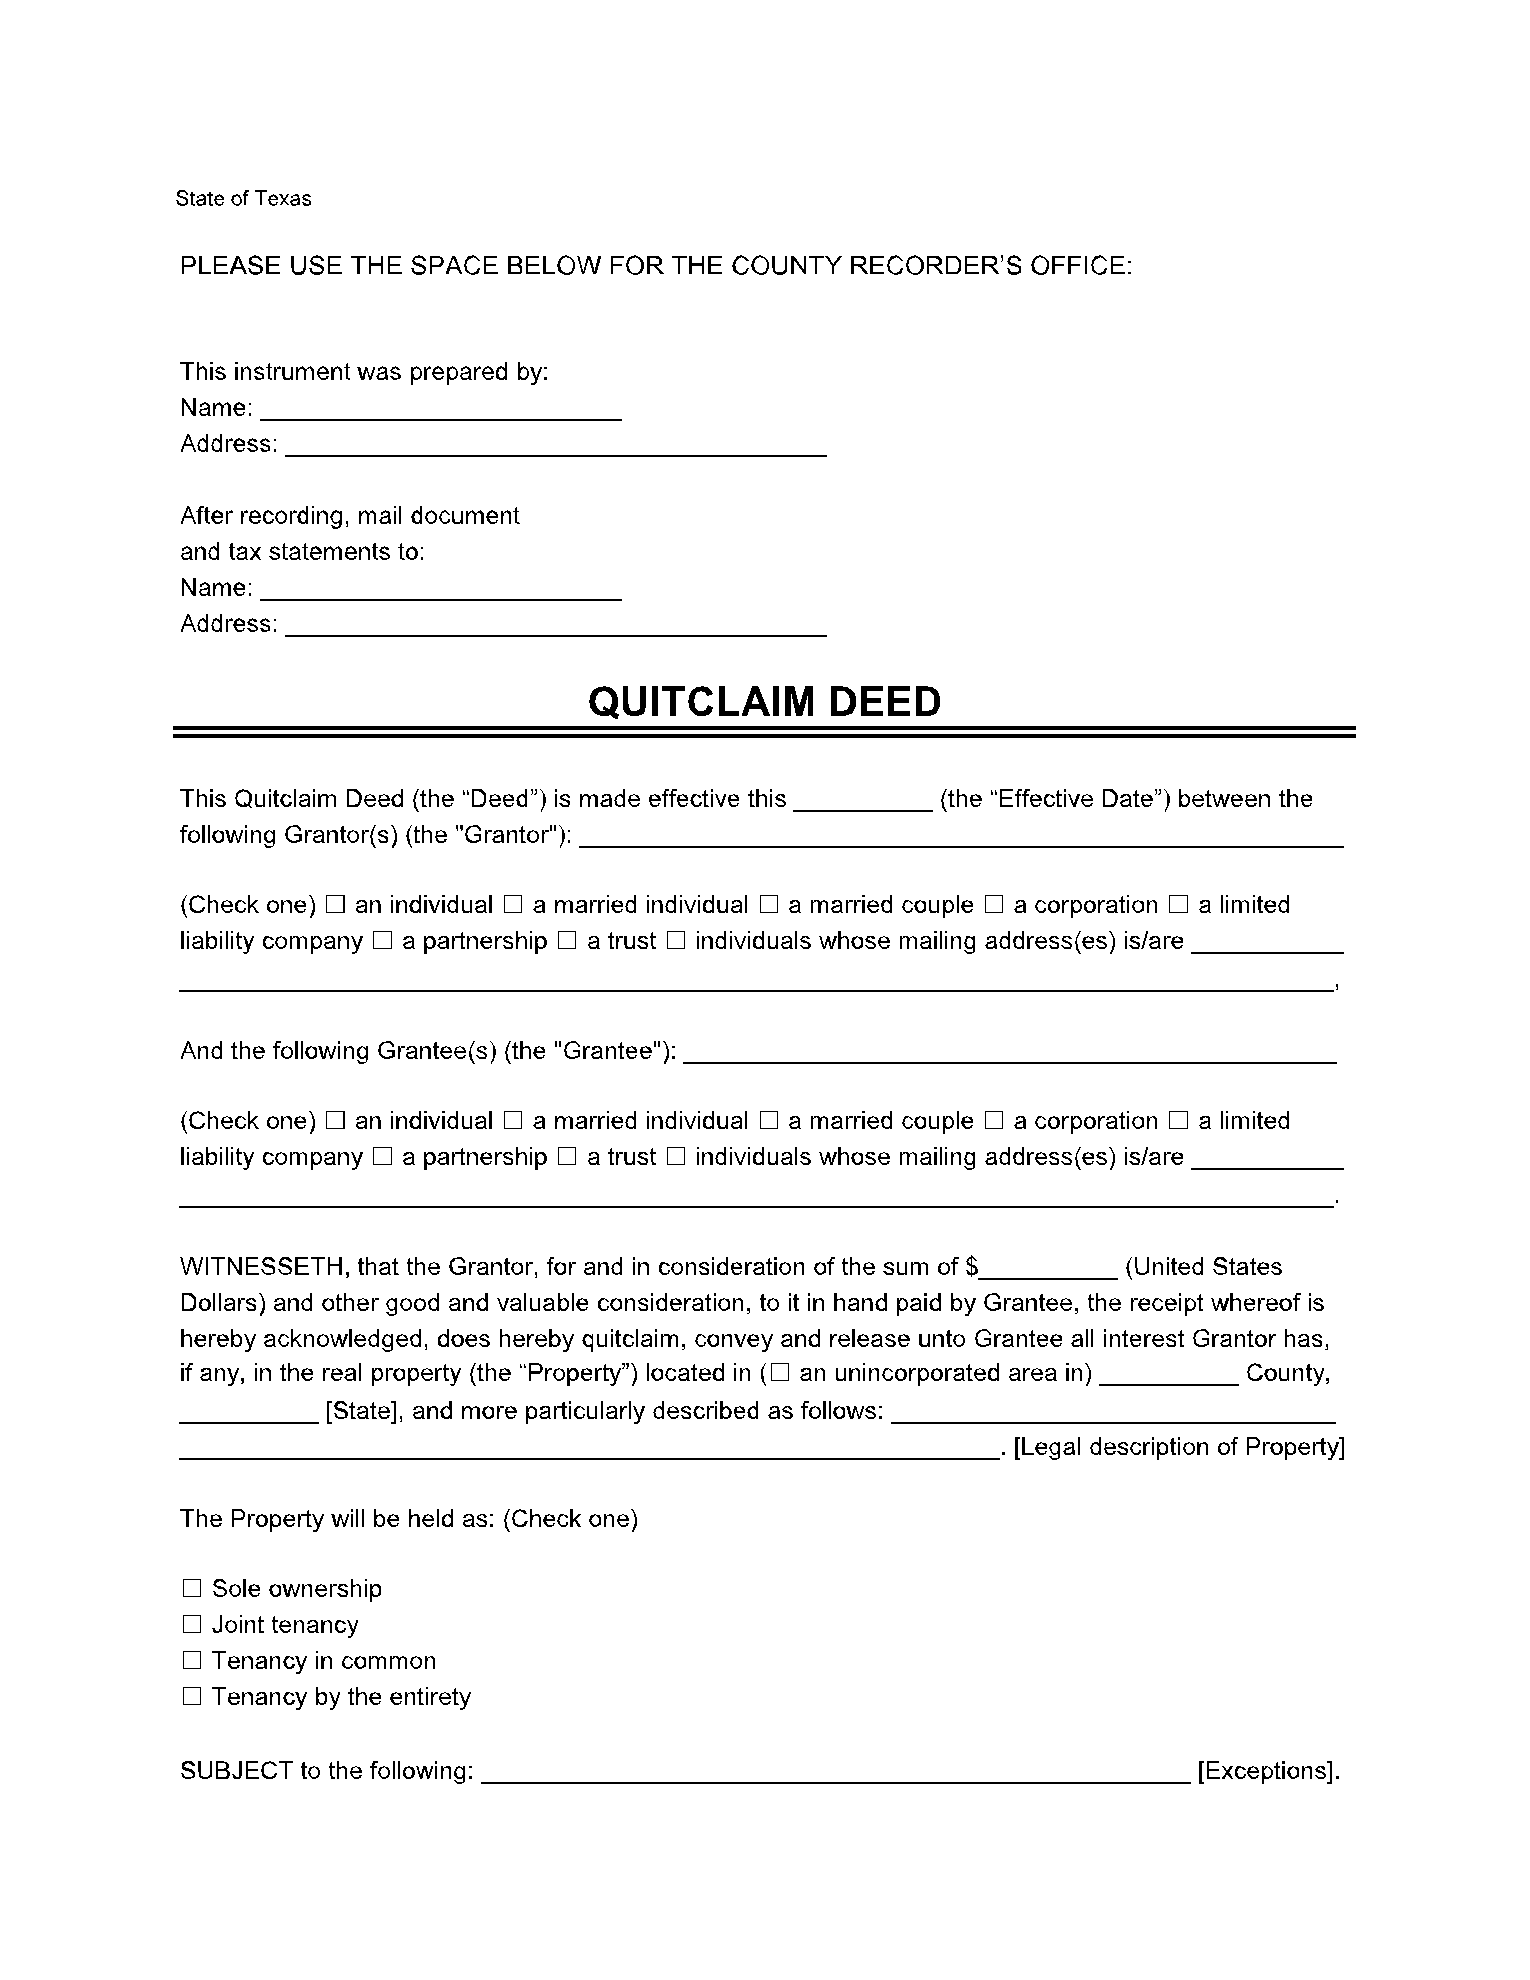 Texas Quit Claim Deed Form 1